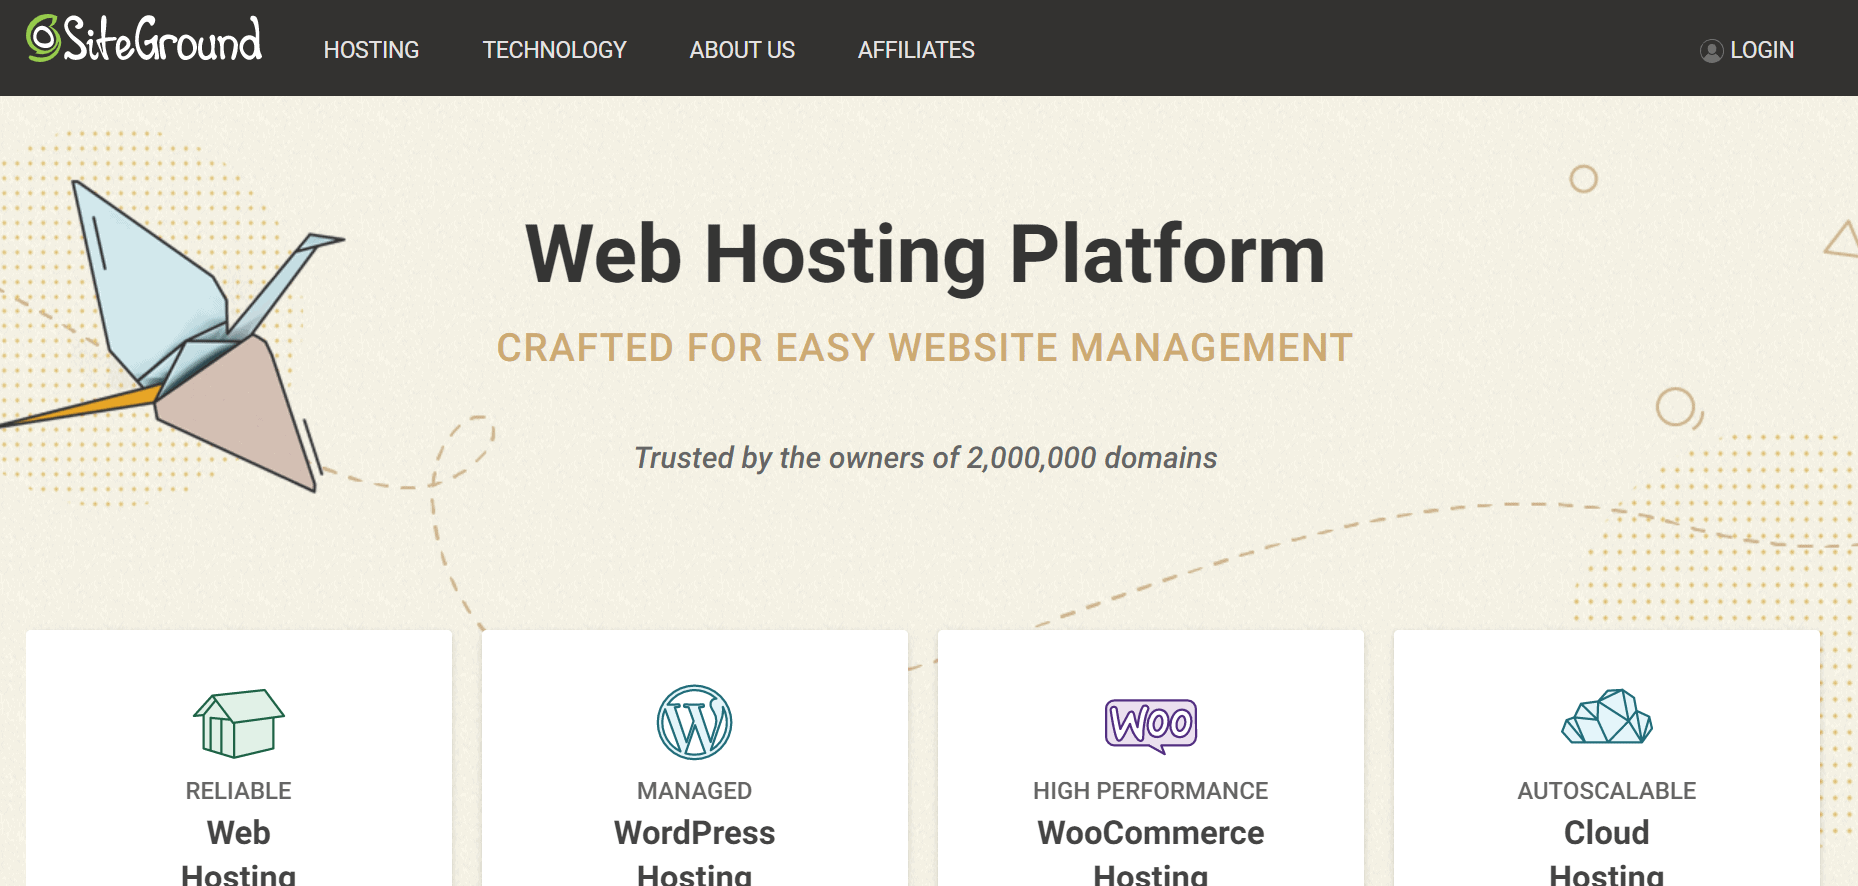 SiteGround Overview - Web Hosting Services For Small Business